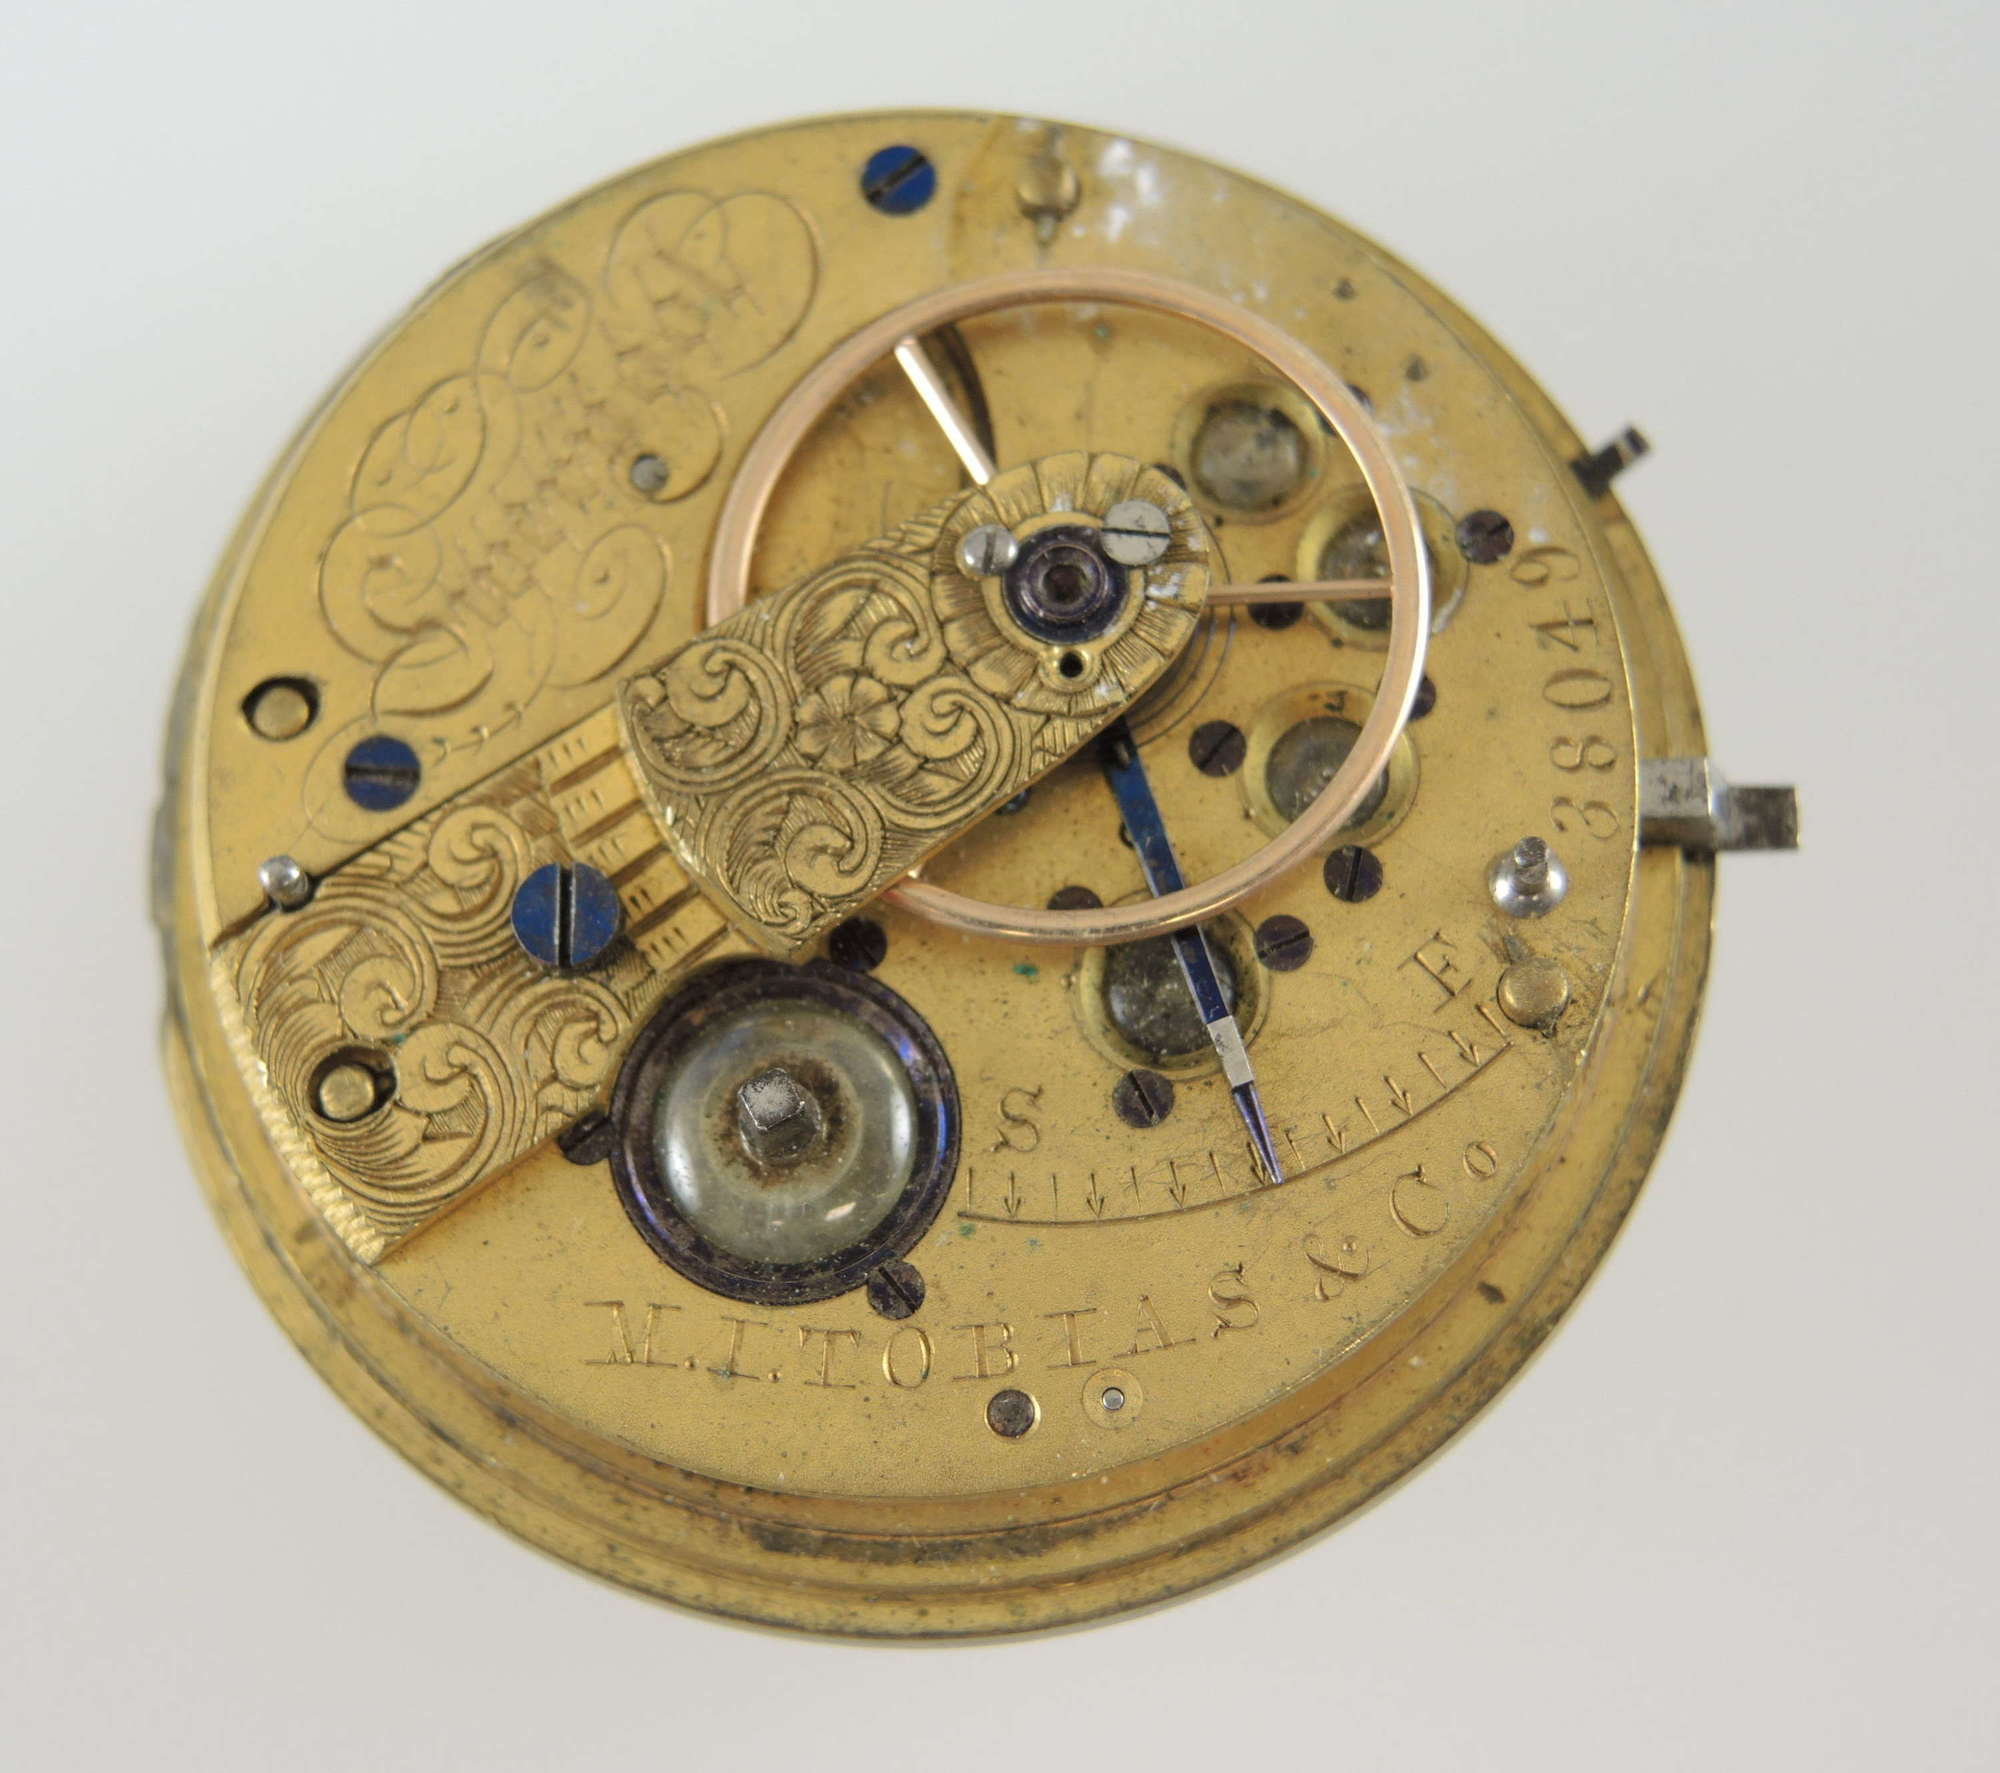 English fusee by movement by M I Tobias c1845